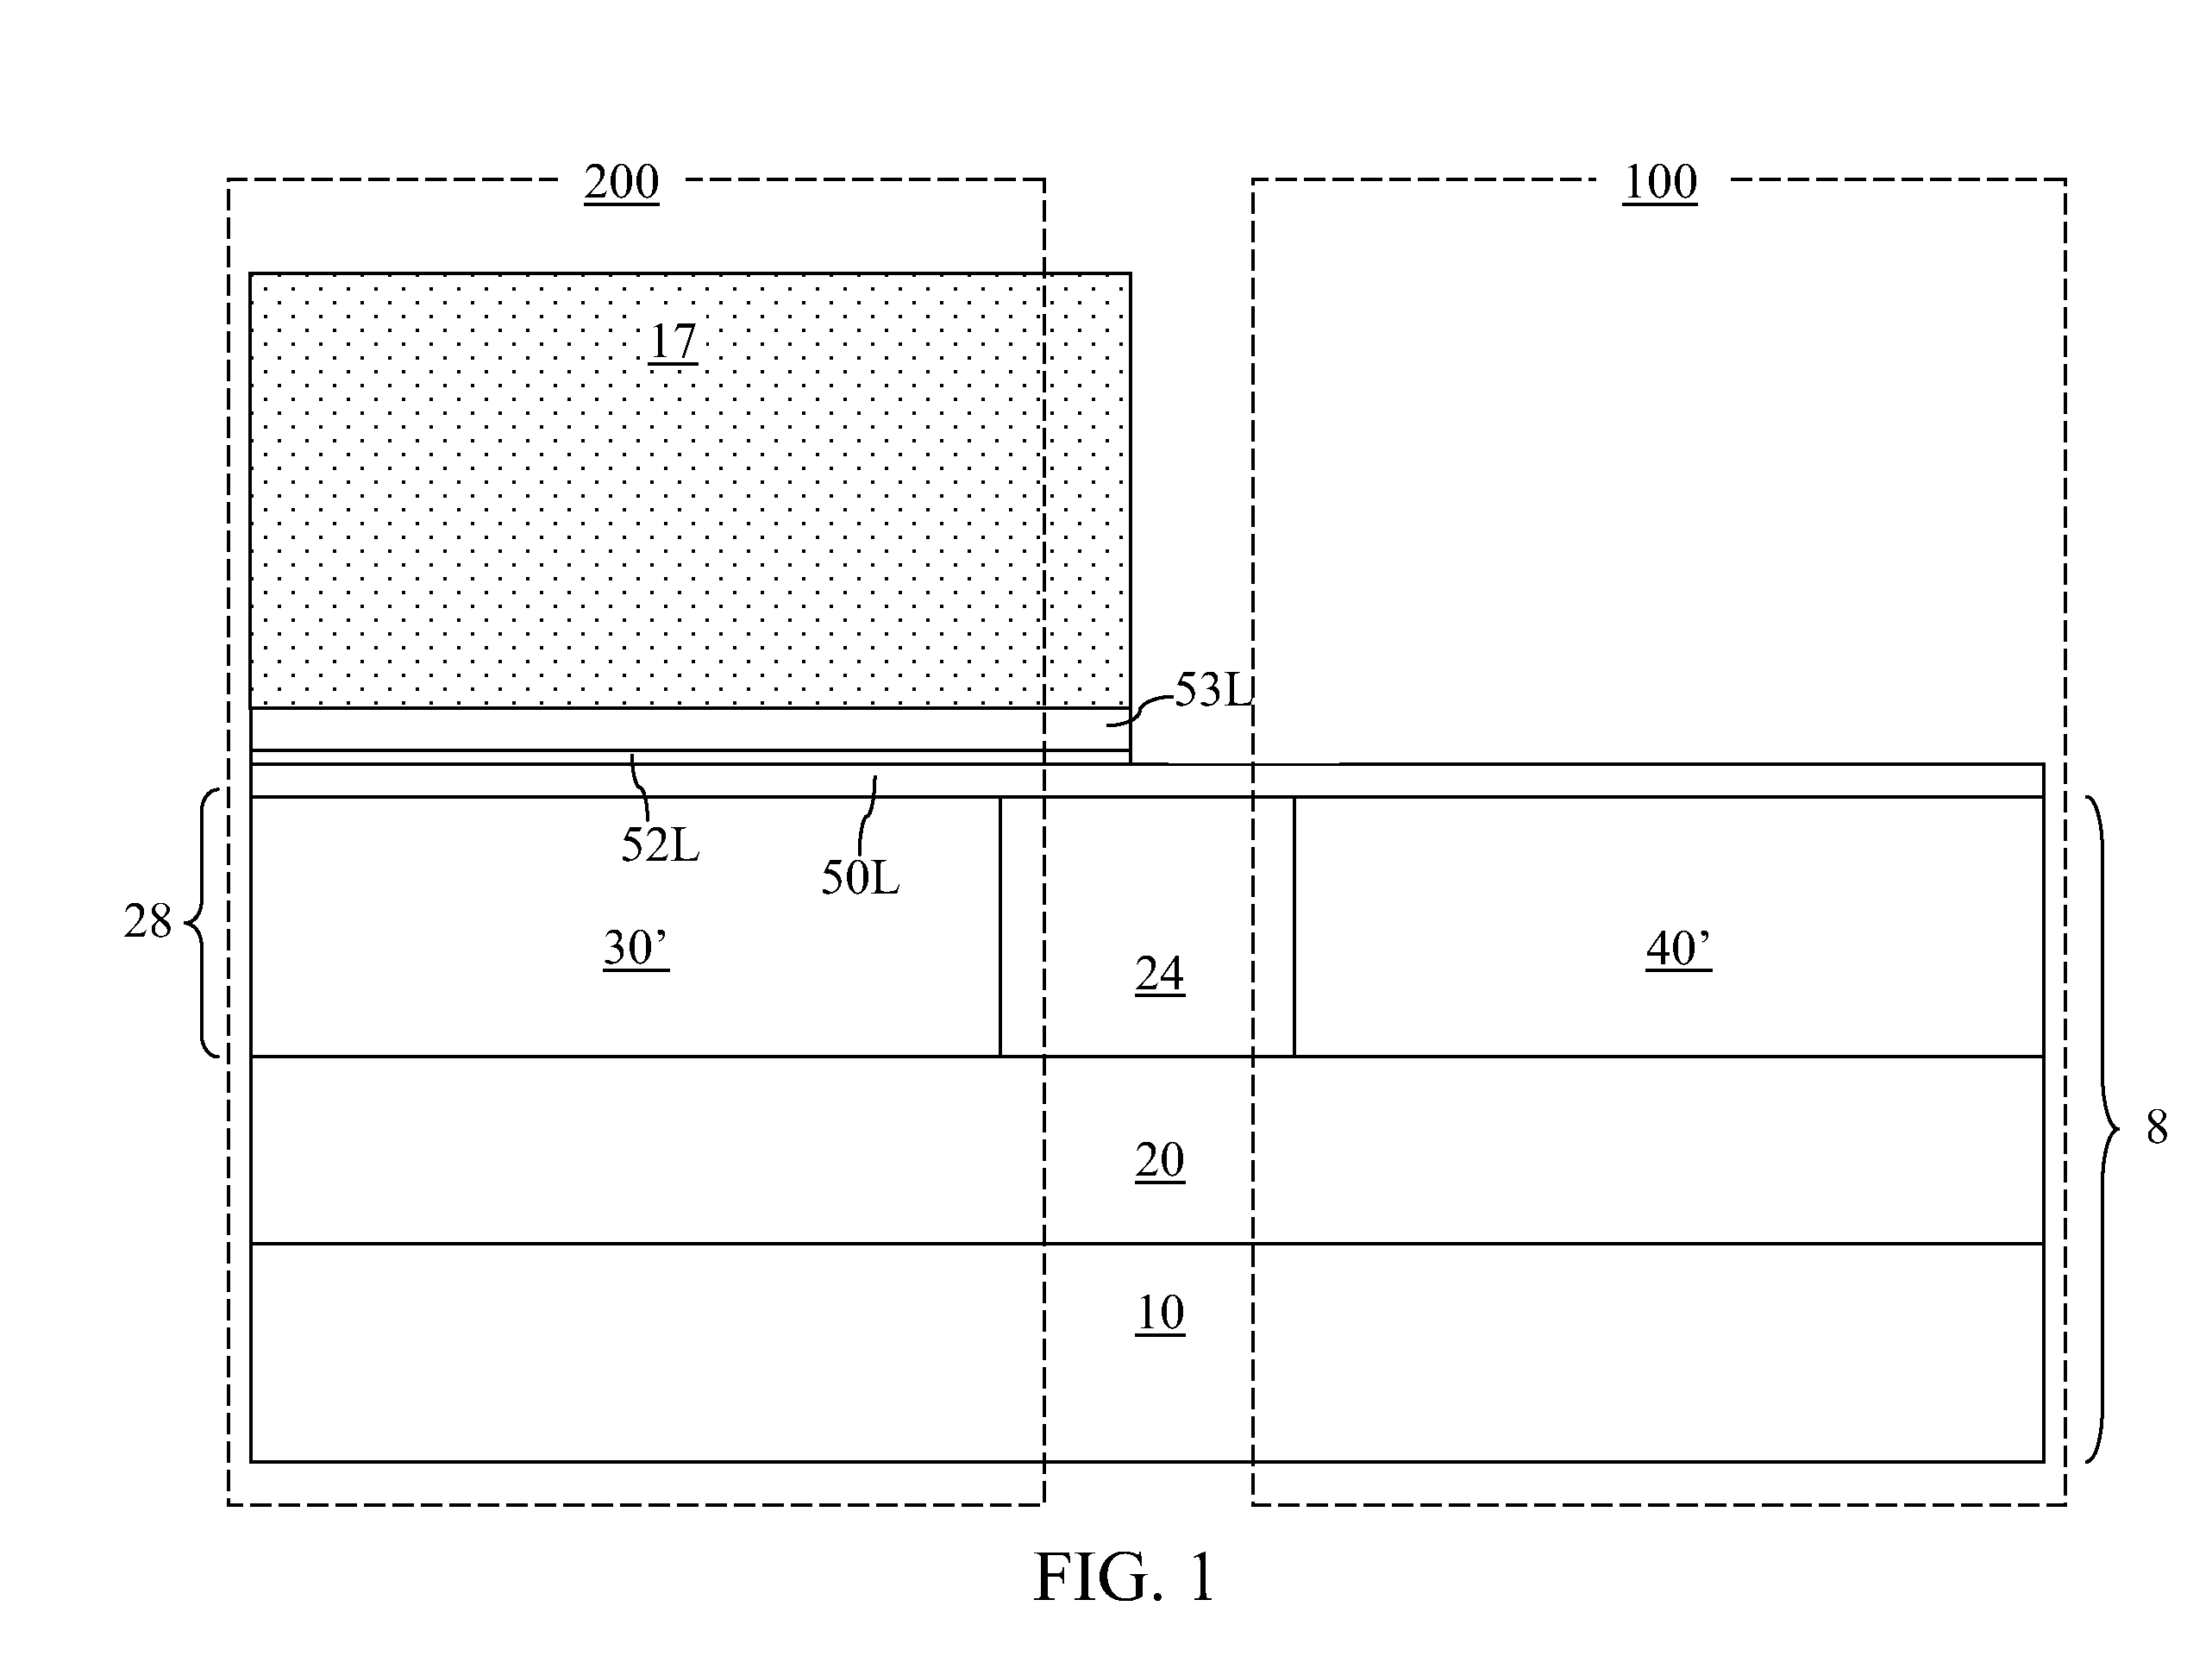 CMOS Transistors With Silicon Germanium Channel and Dual Embedded Stressors